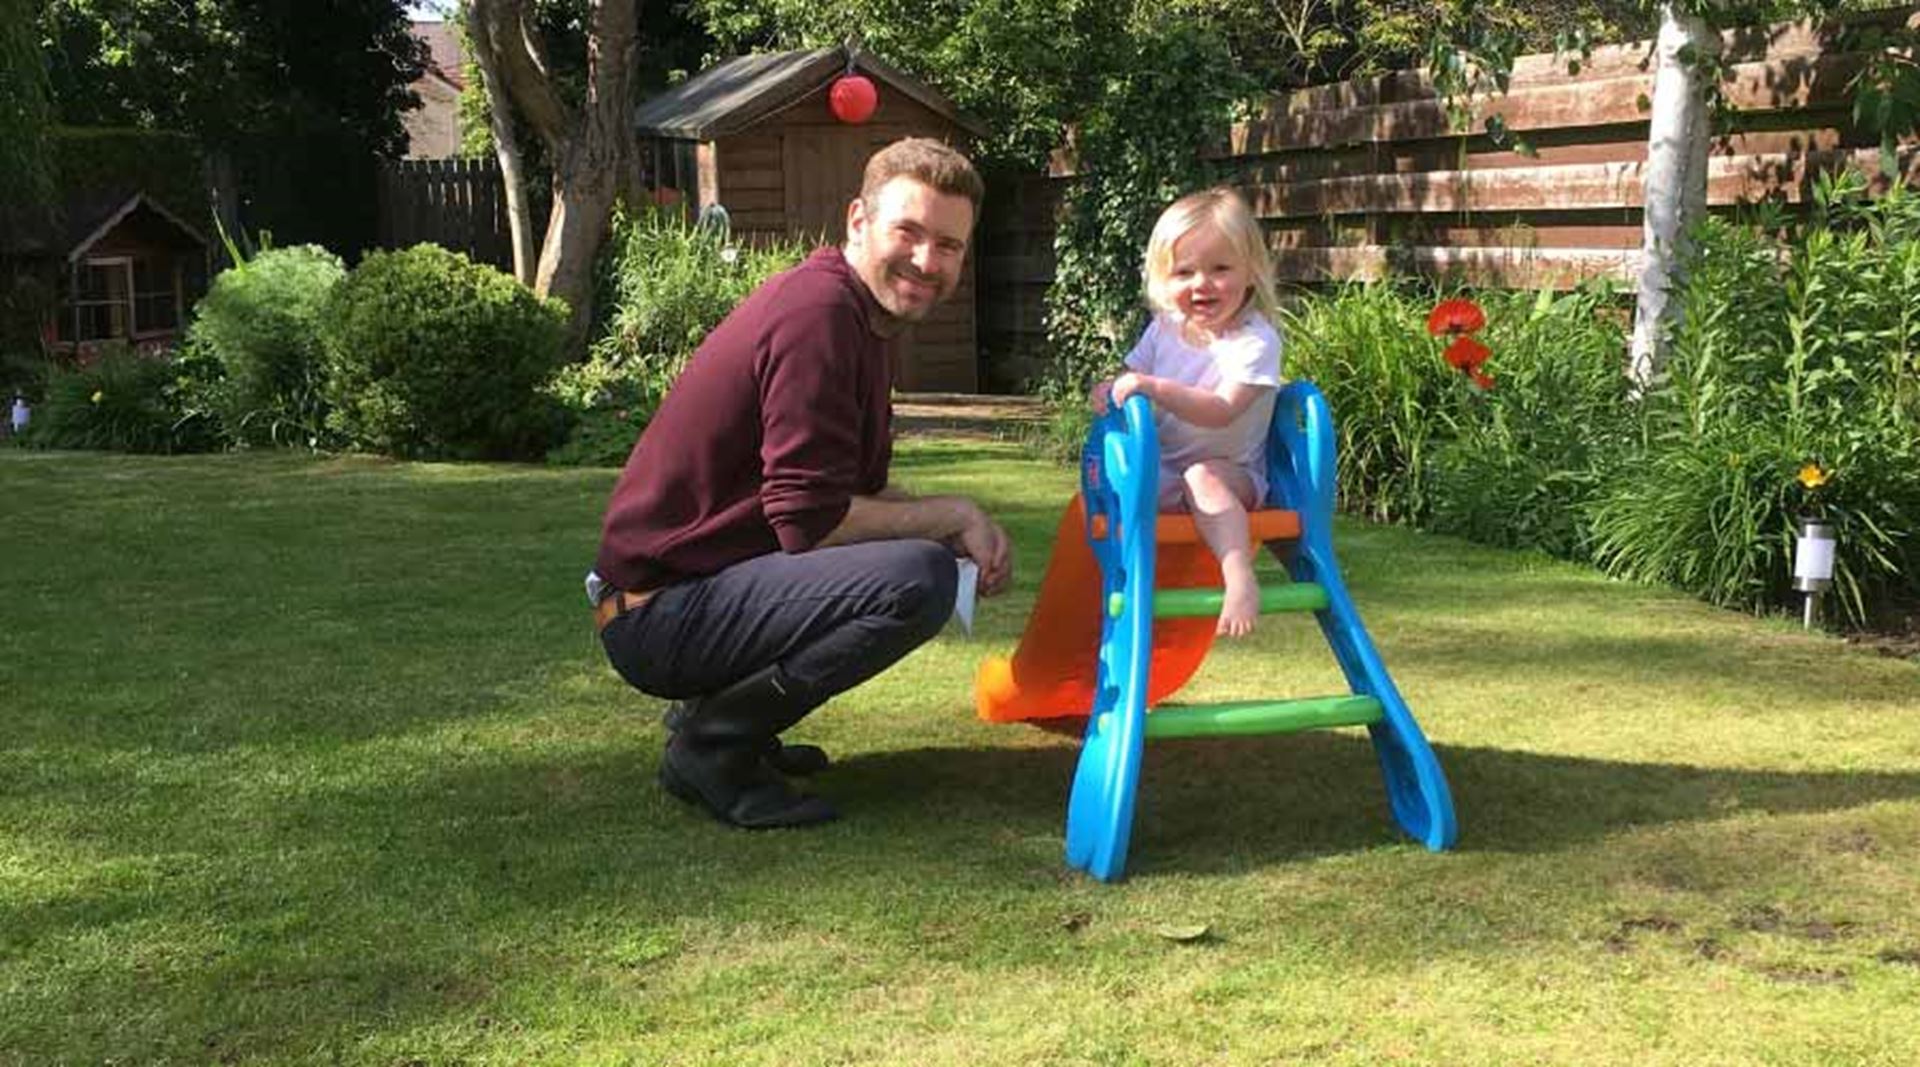 Adam and his daughter Skye playing in the garden